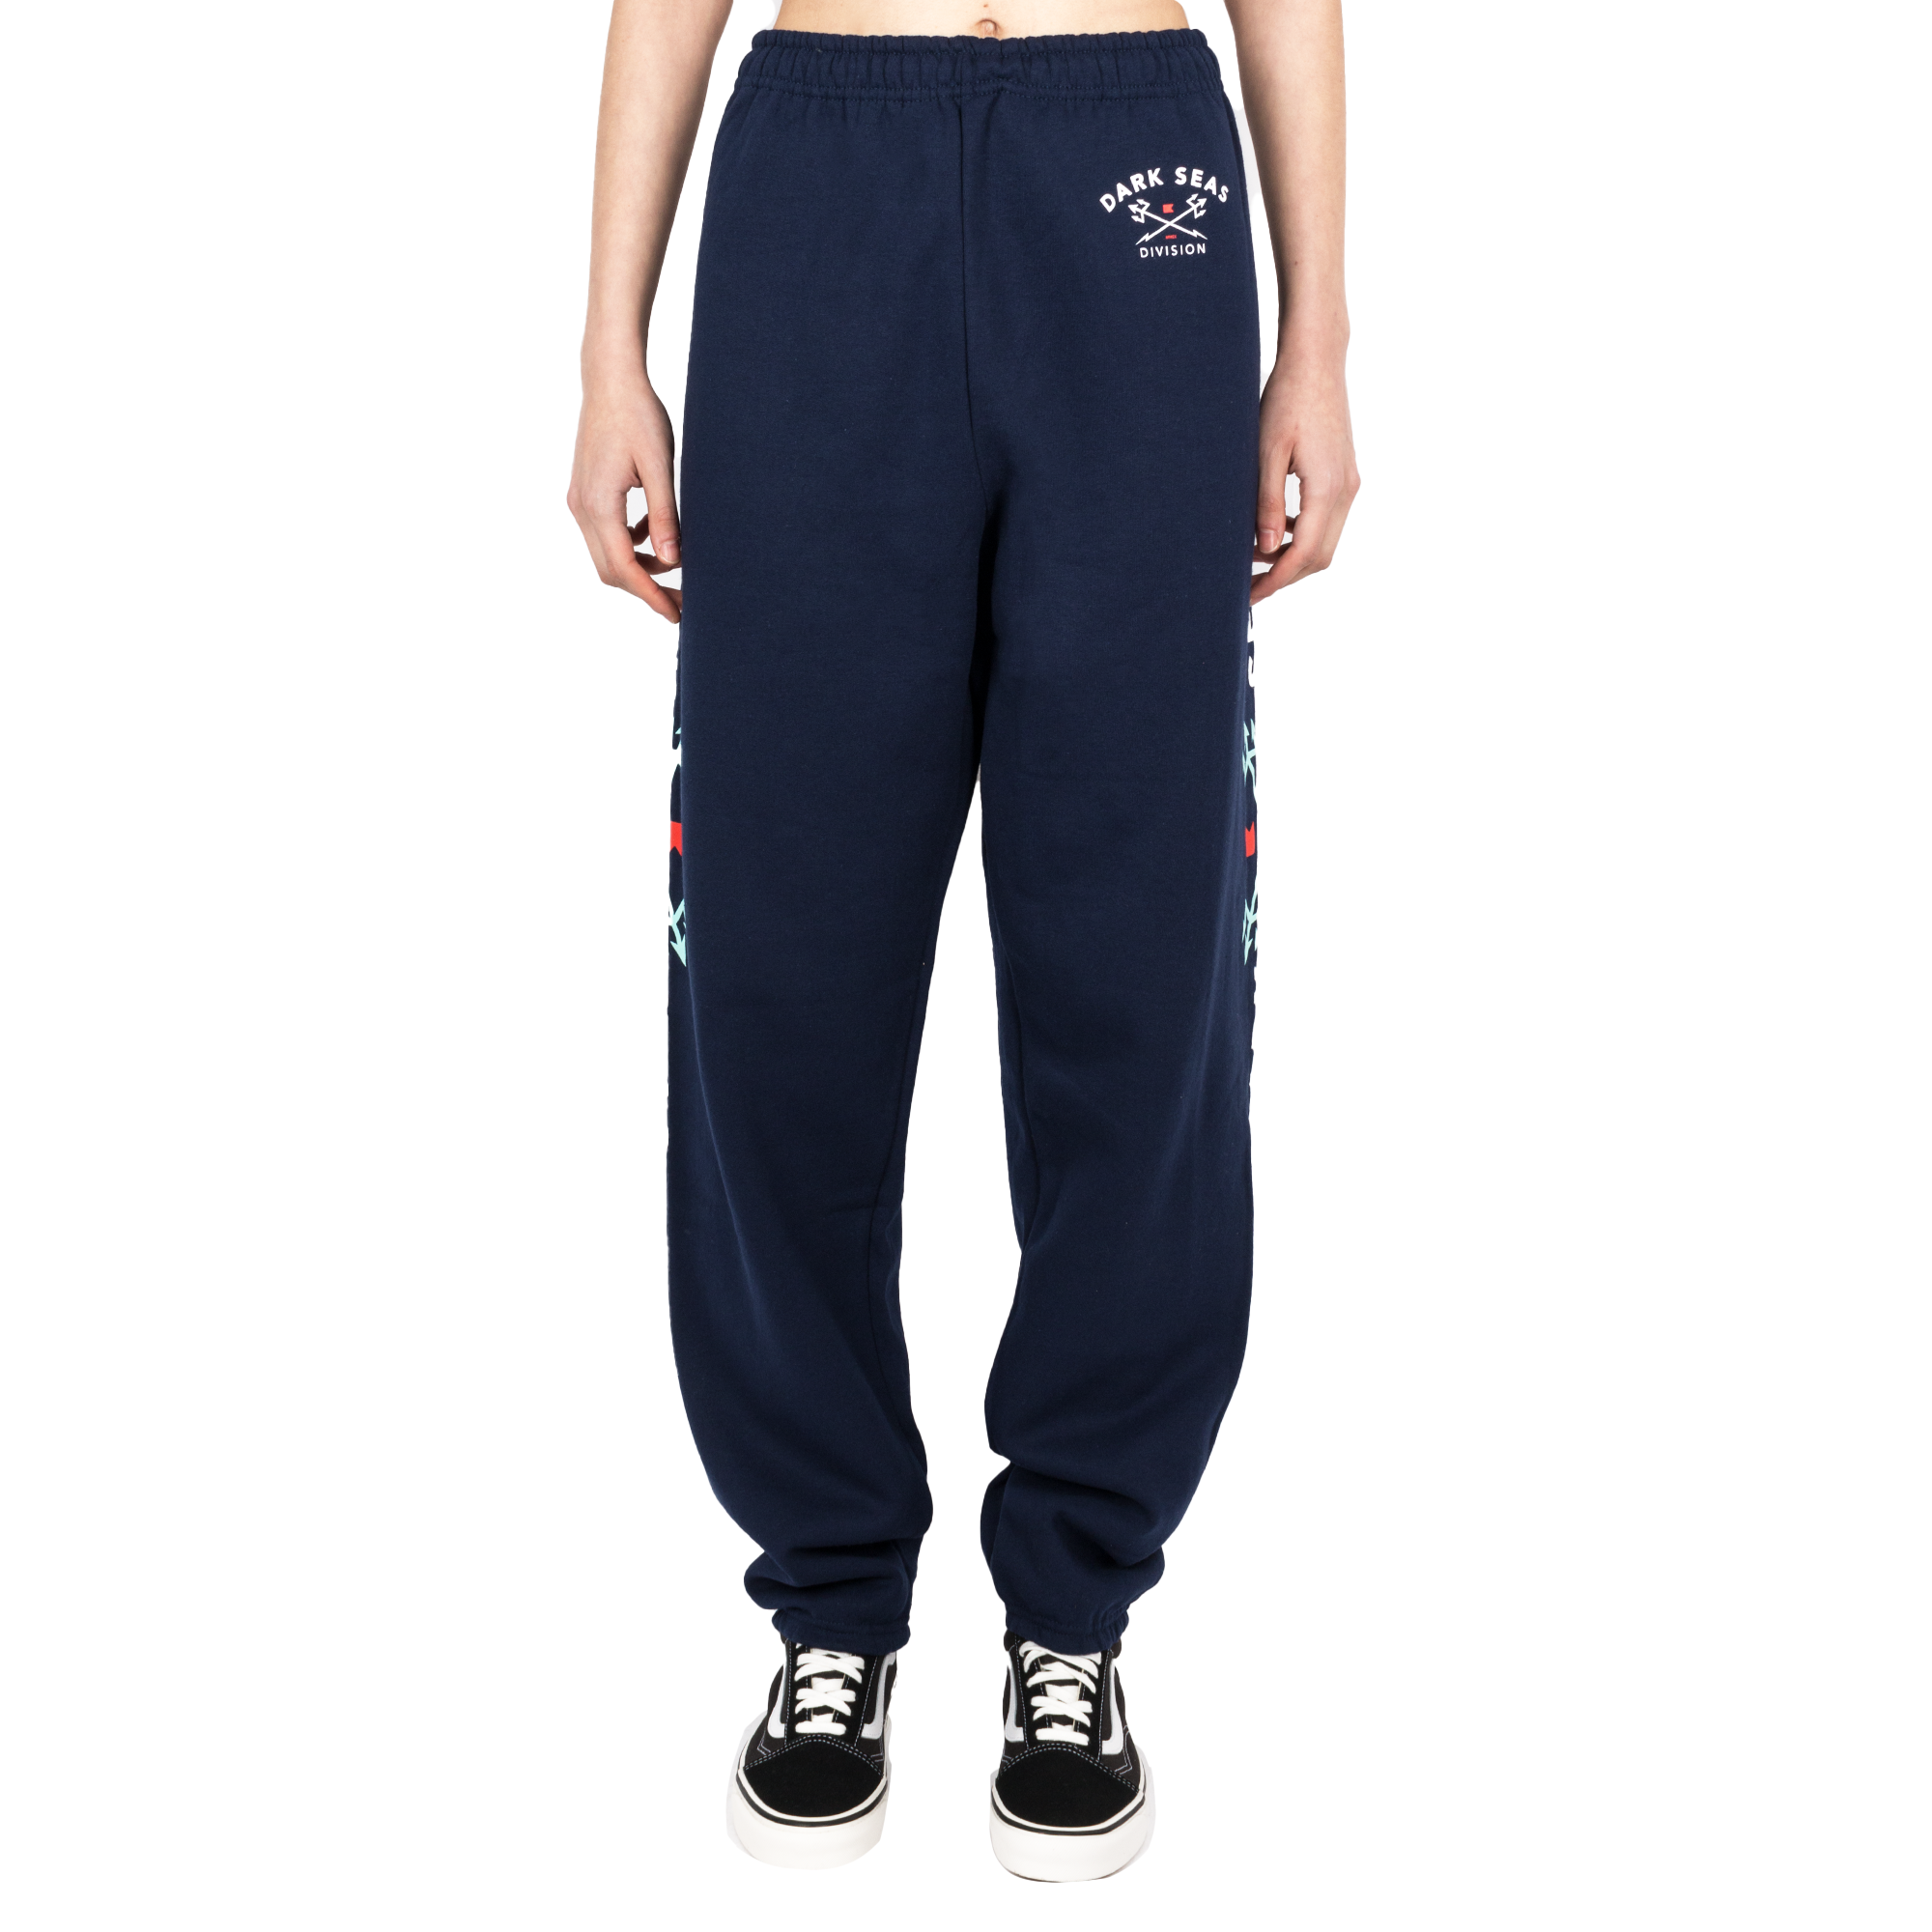 Unisex blue and white paisley track pants – Phat Designs